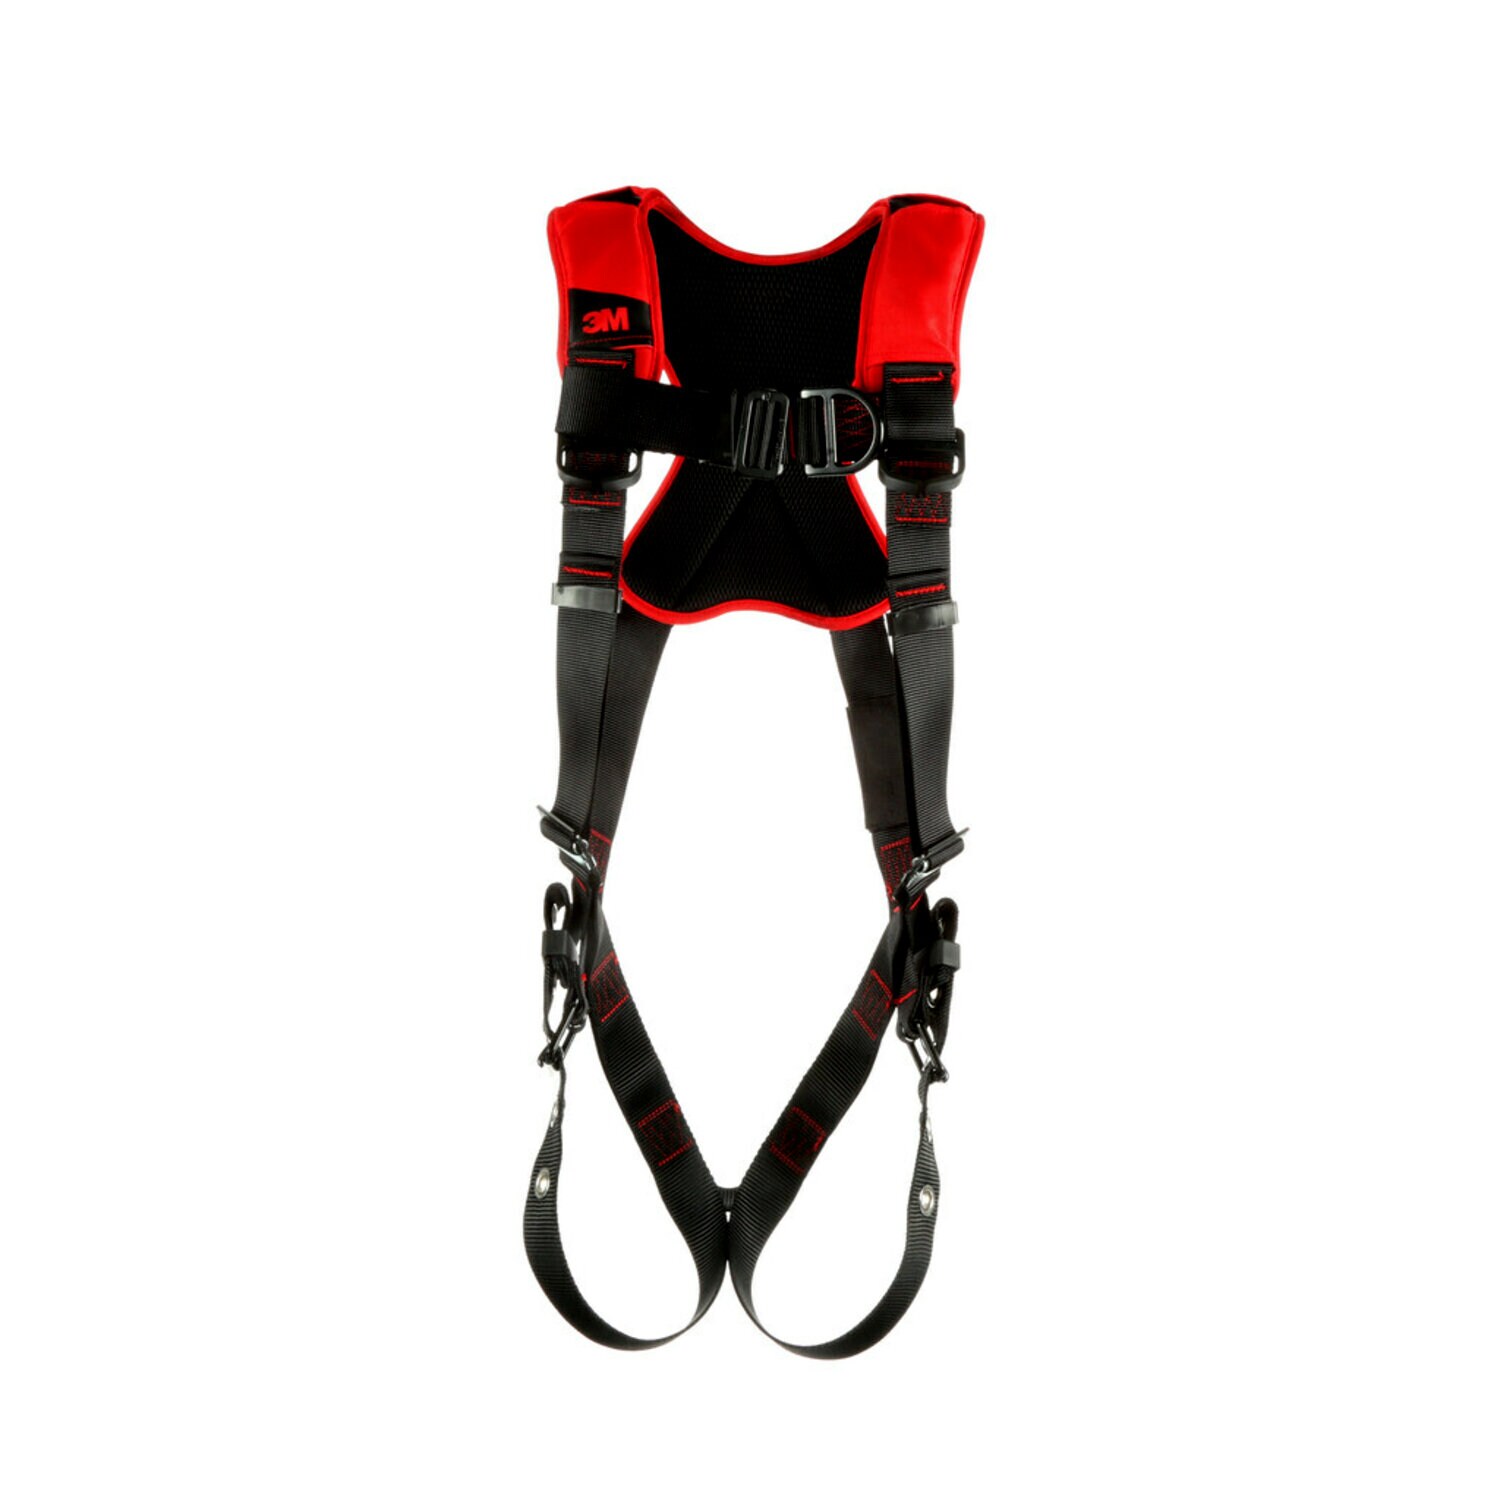 7012816712 - 3M Protecta P200 Comfort Vest Climbing Safety Harness 1161432, 2X